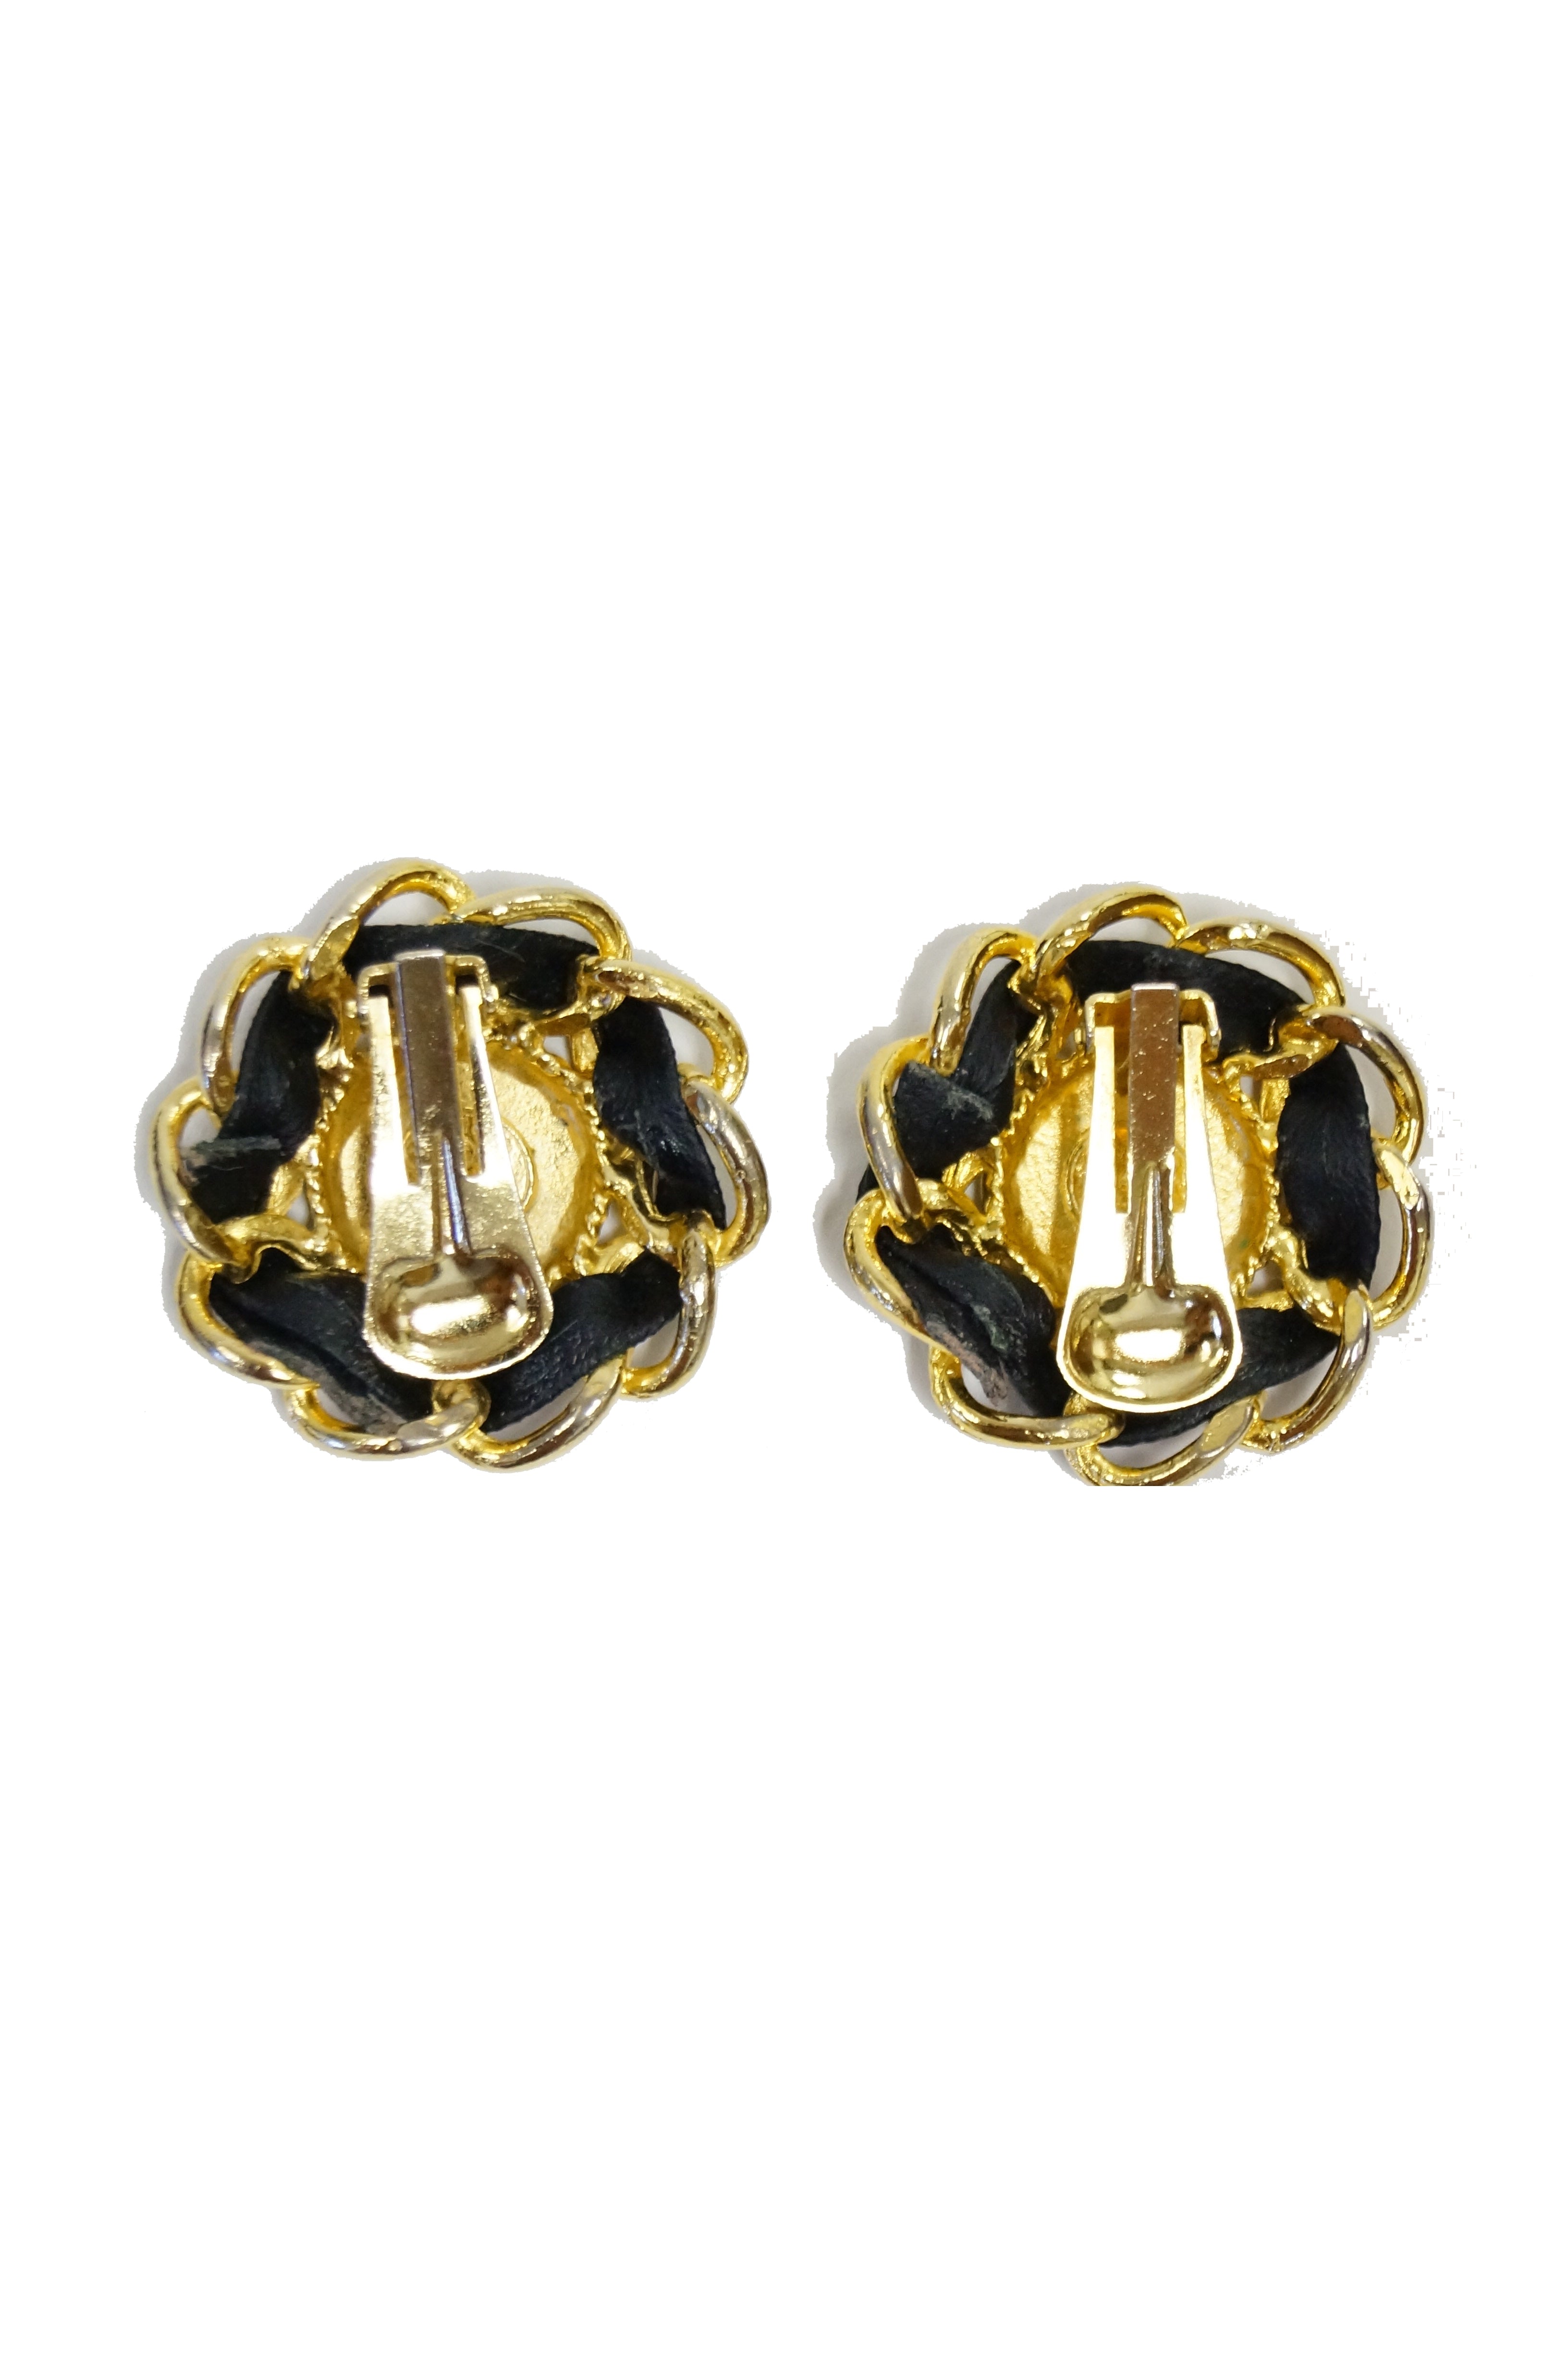 Vintage Chanel Gold Plated Clip On Earrings 1990s - AW 1995 Collection